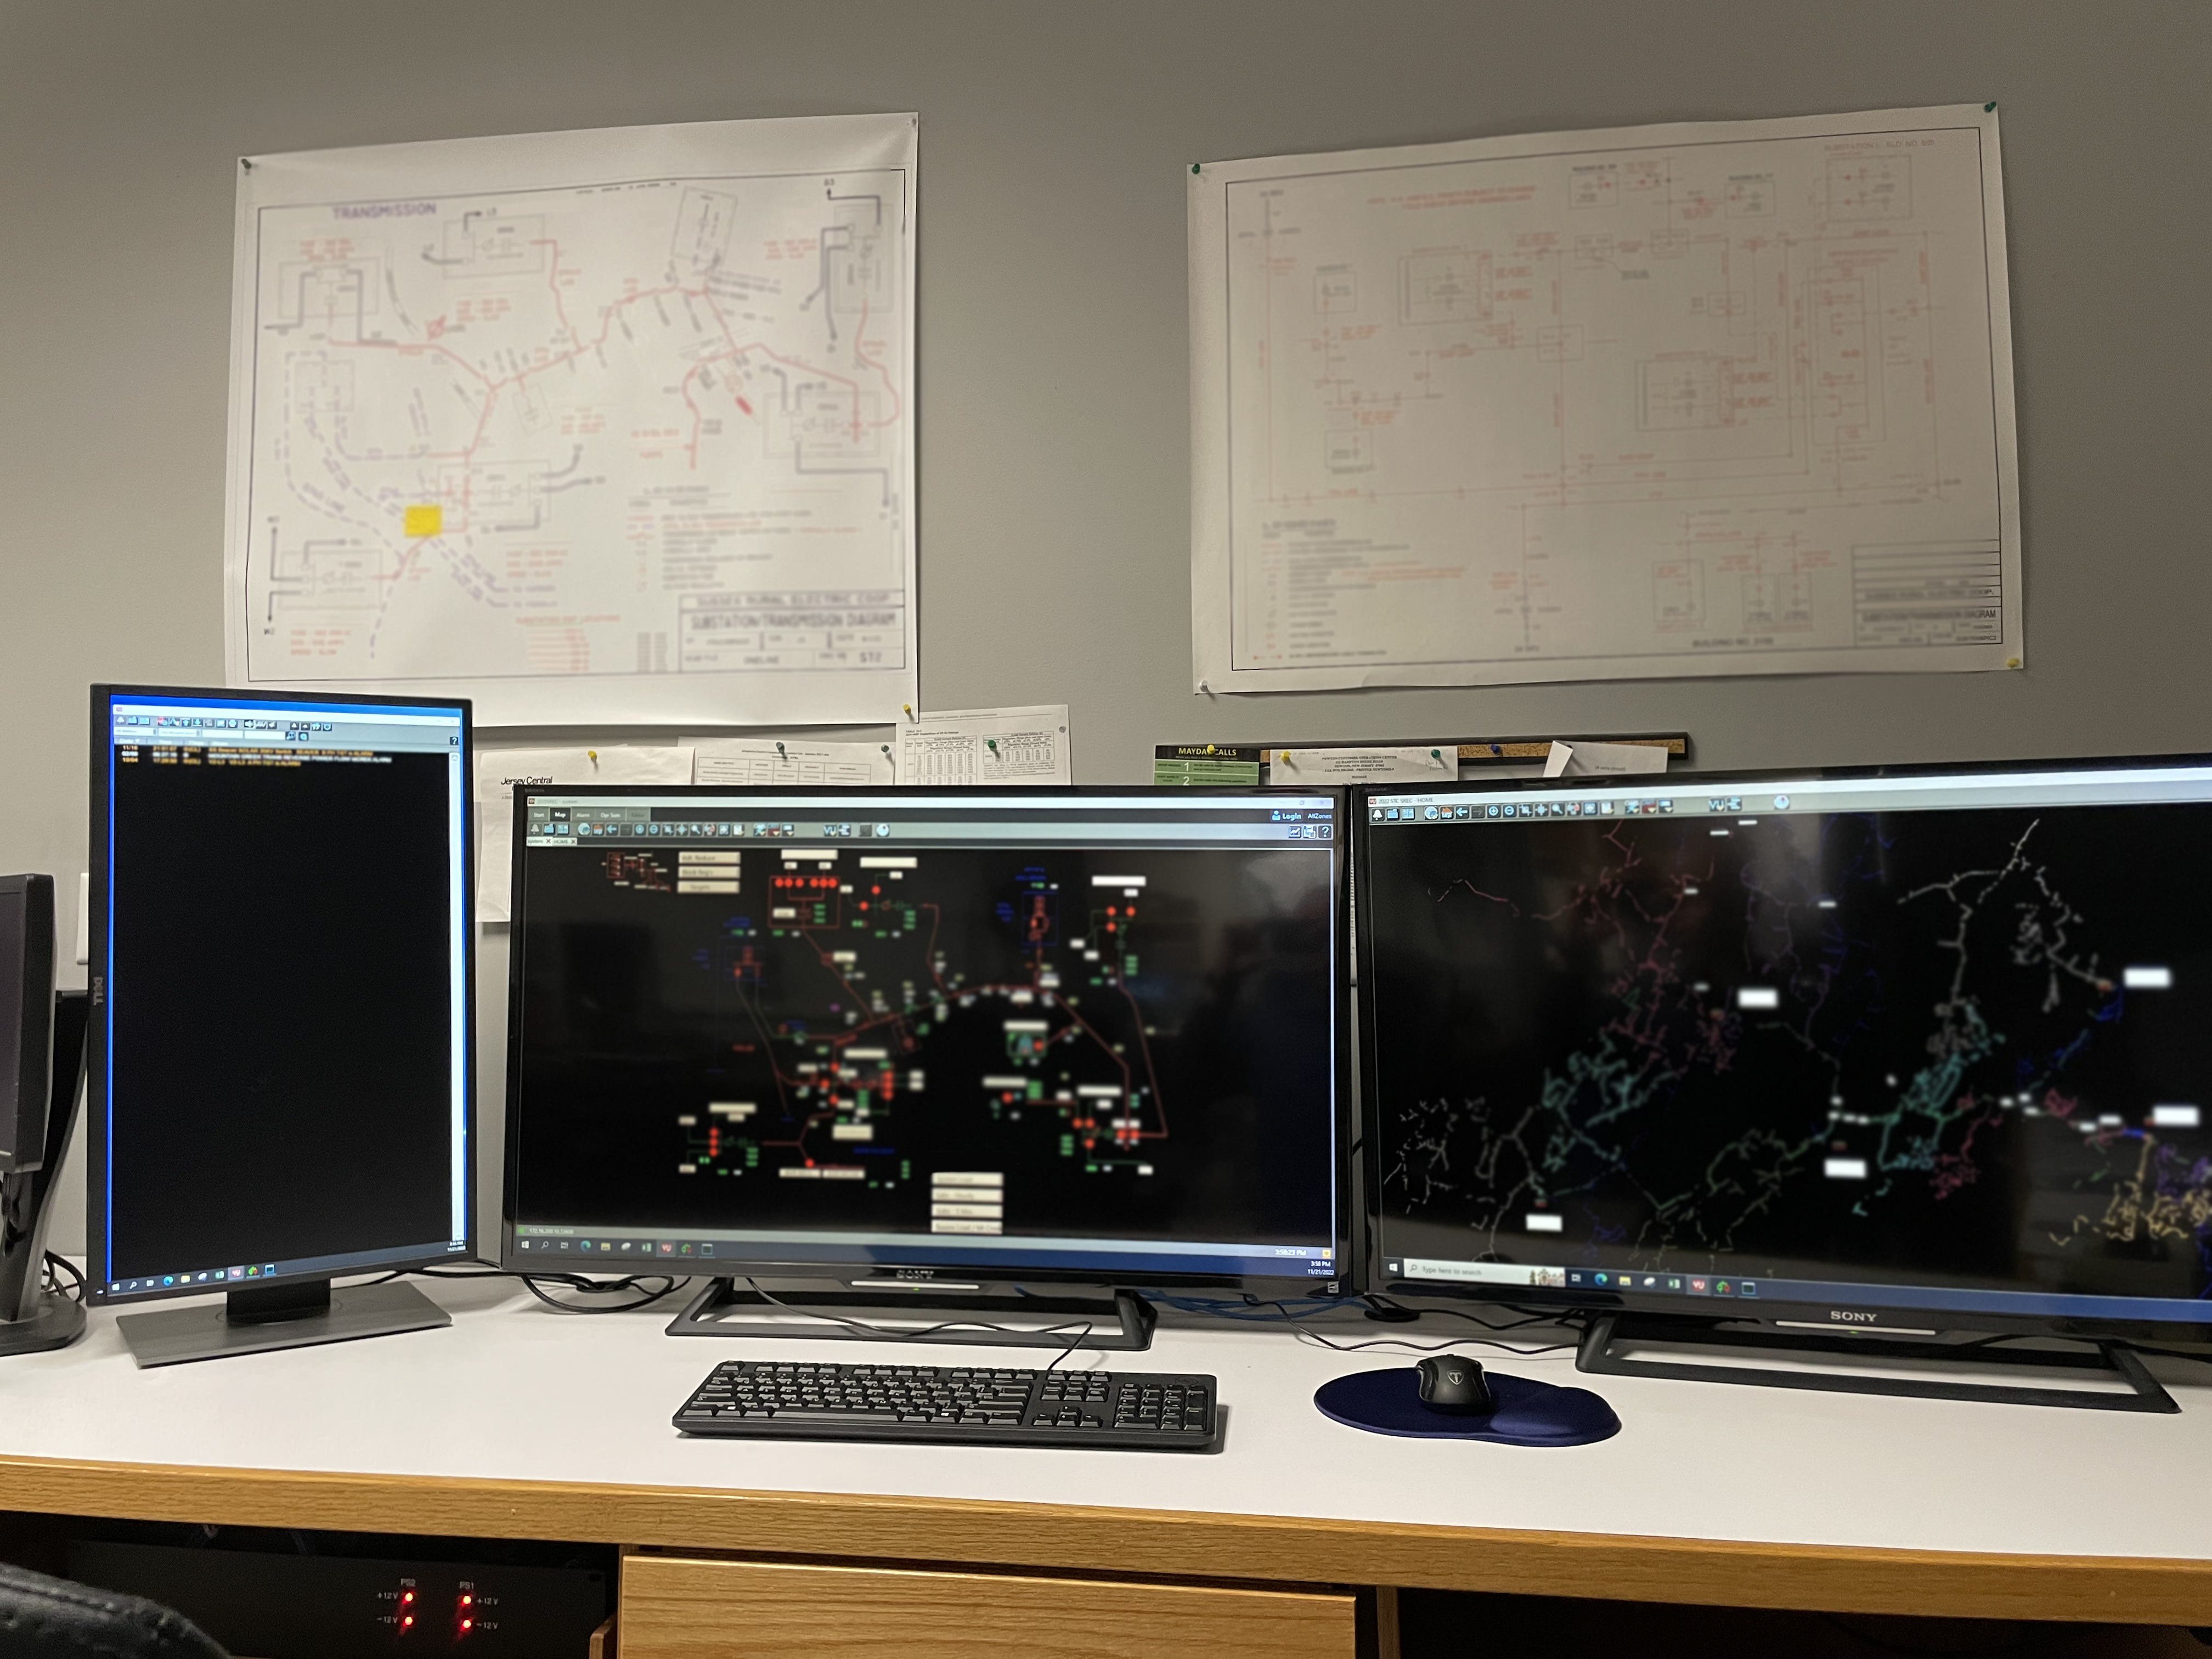 Pictured: A SCADA (“Supervisory Control And Data Acquisition”) system used to remotely monitor and control utility equipment.